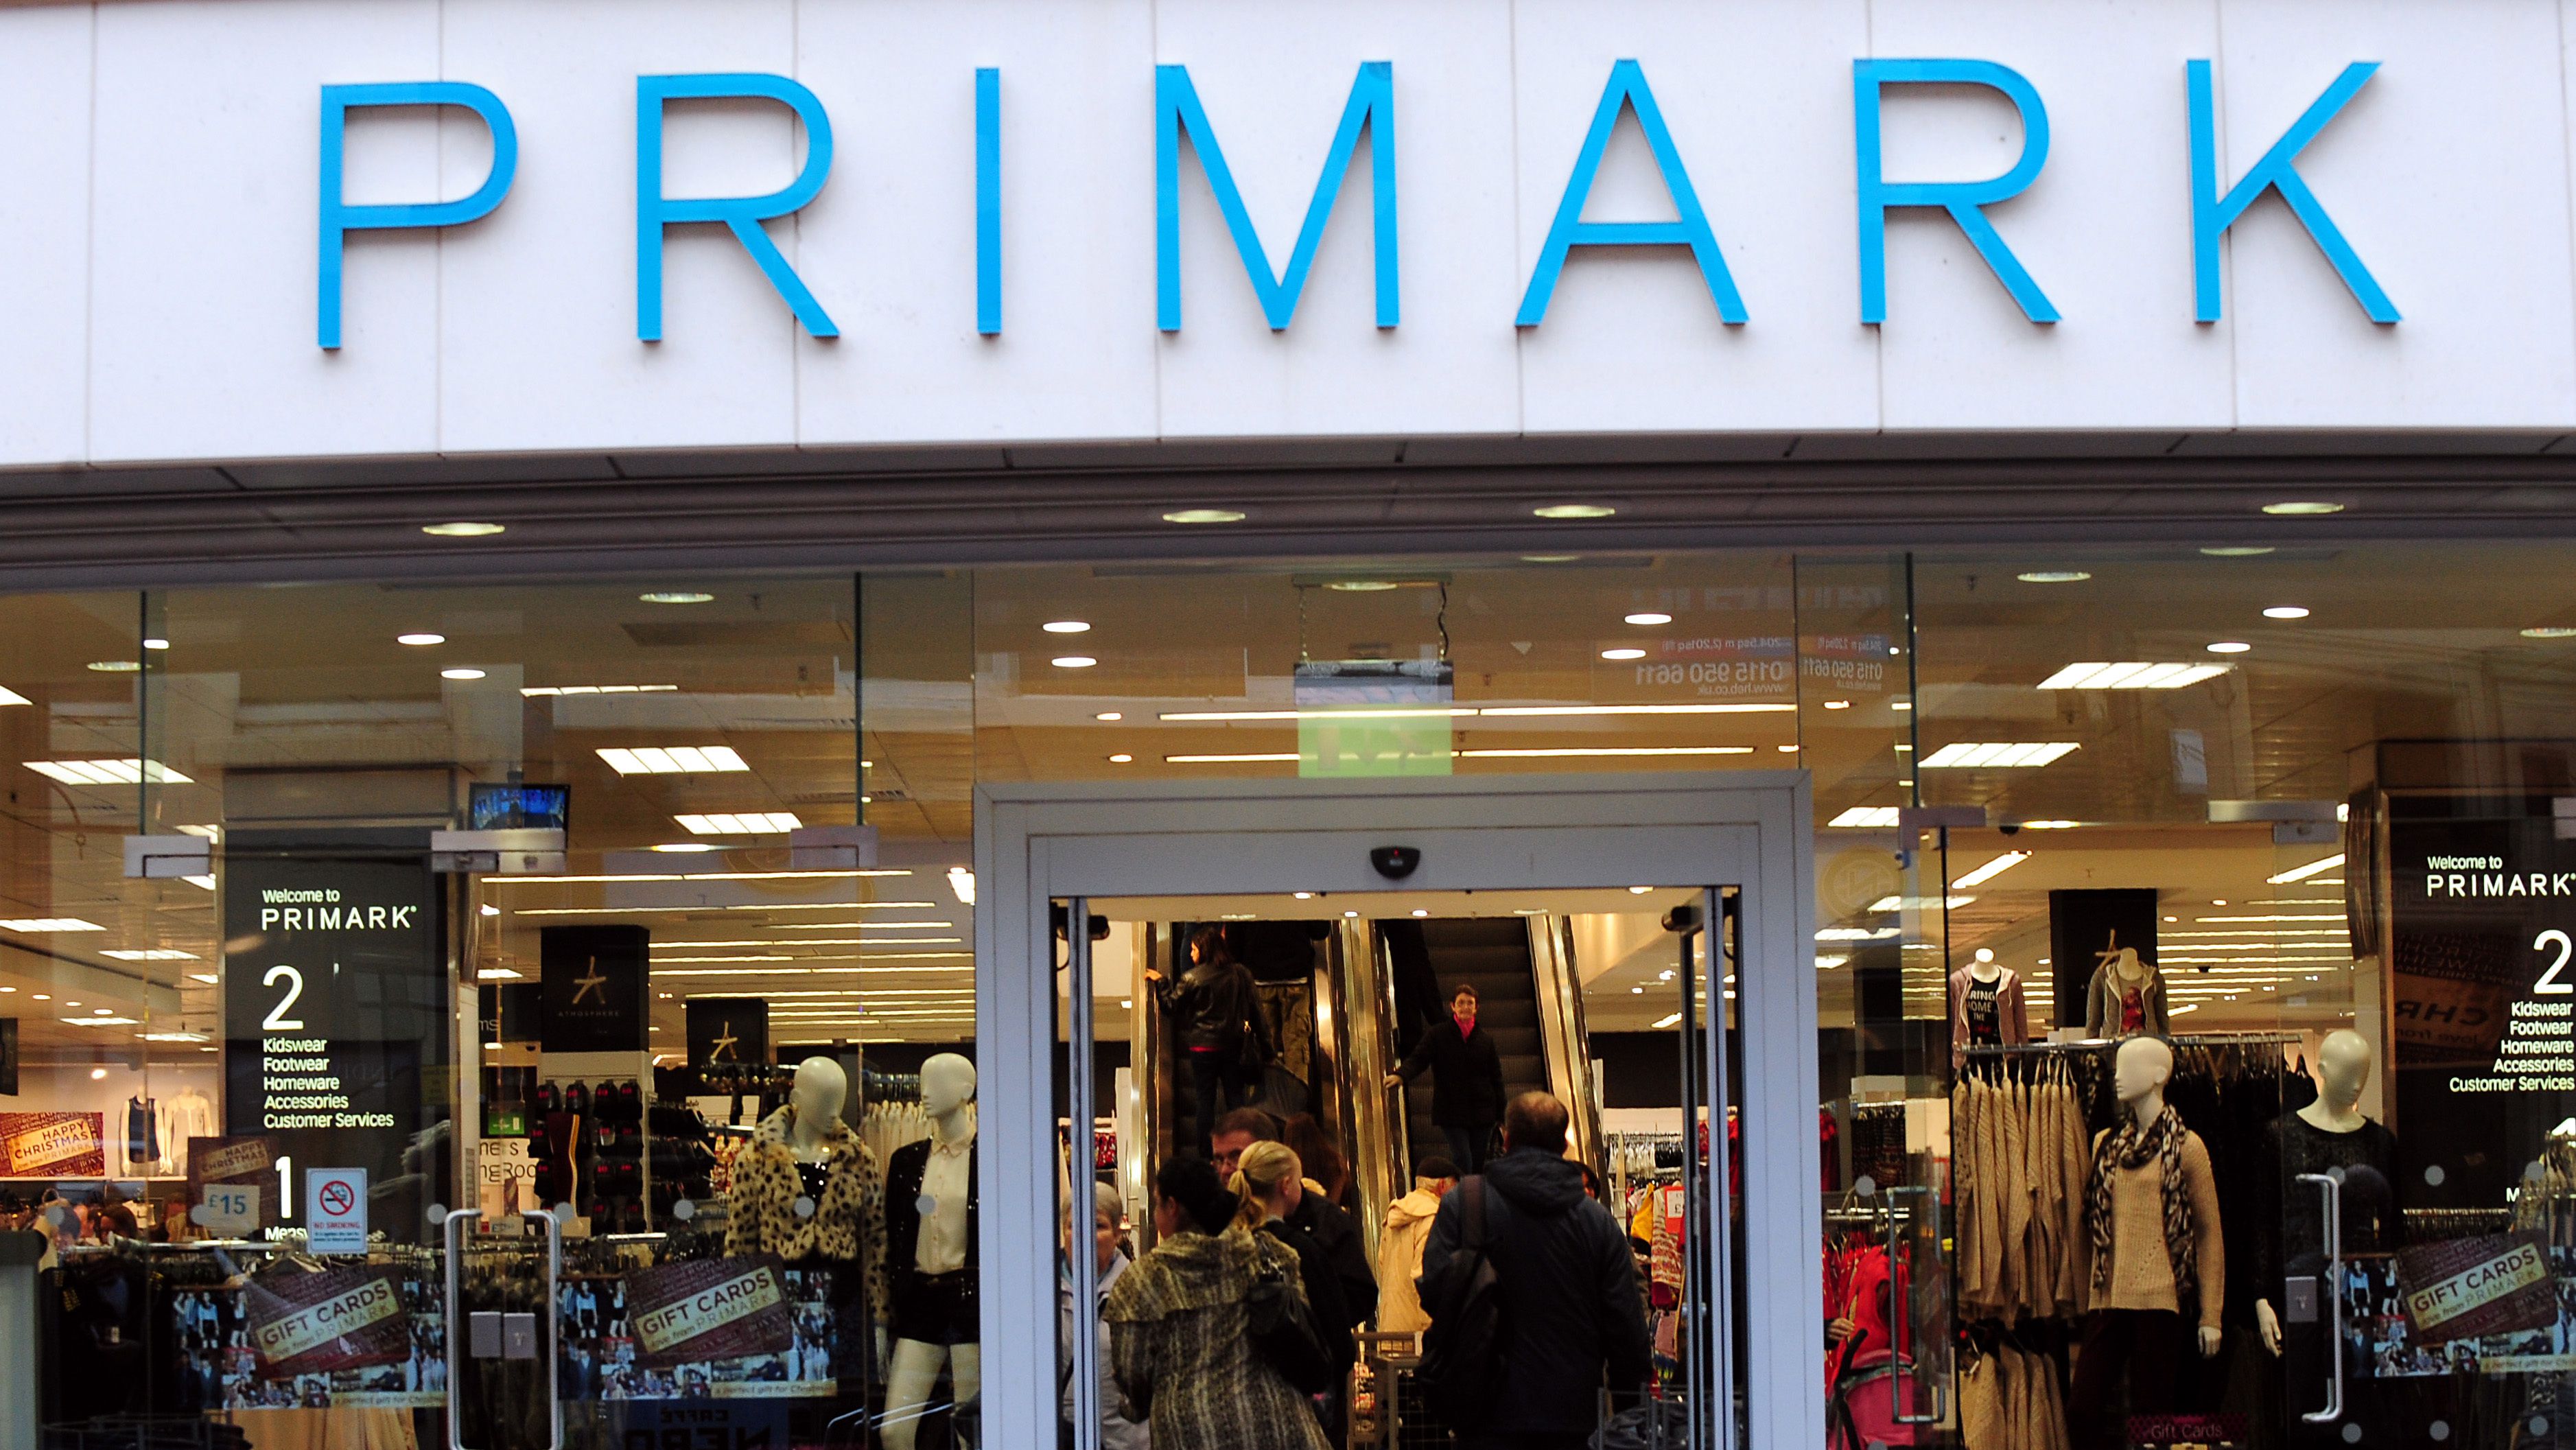 Primark settles the debate on how to pronounce its name | Fashion - KISS